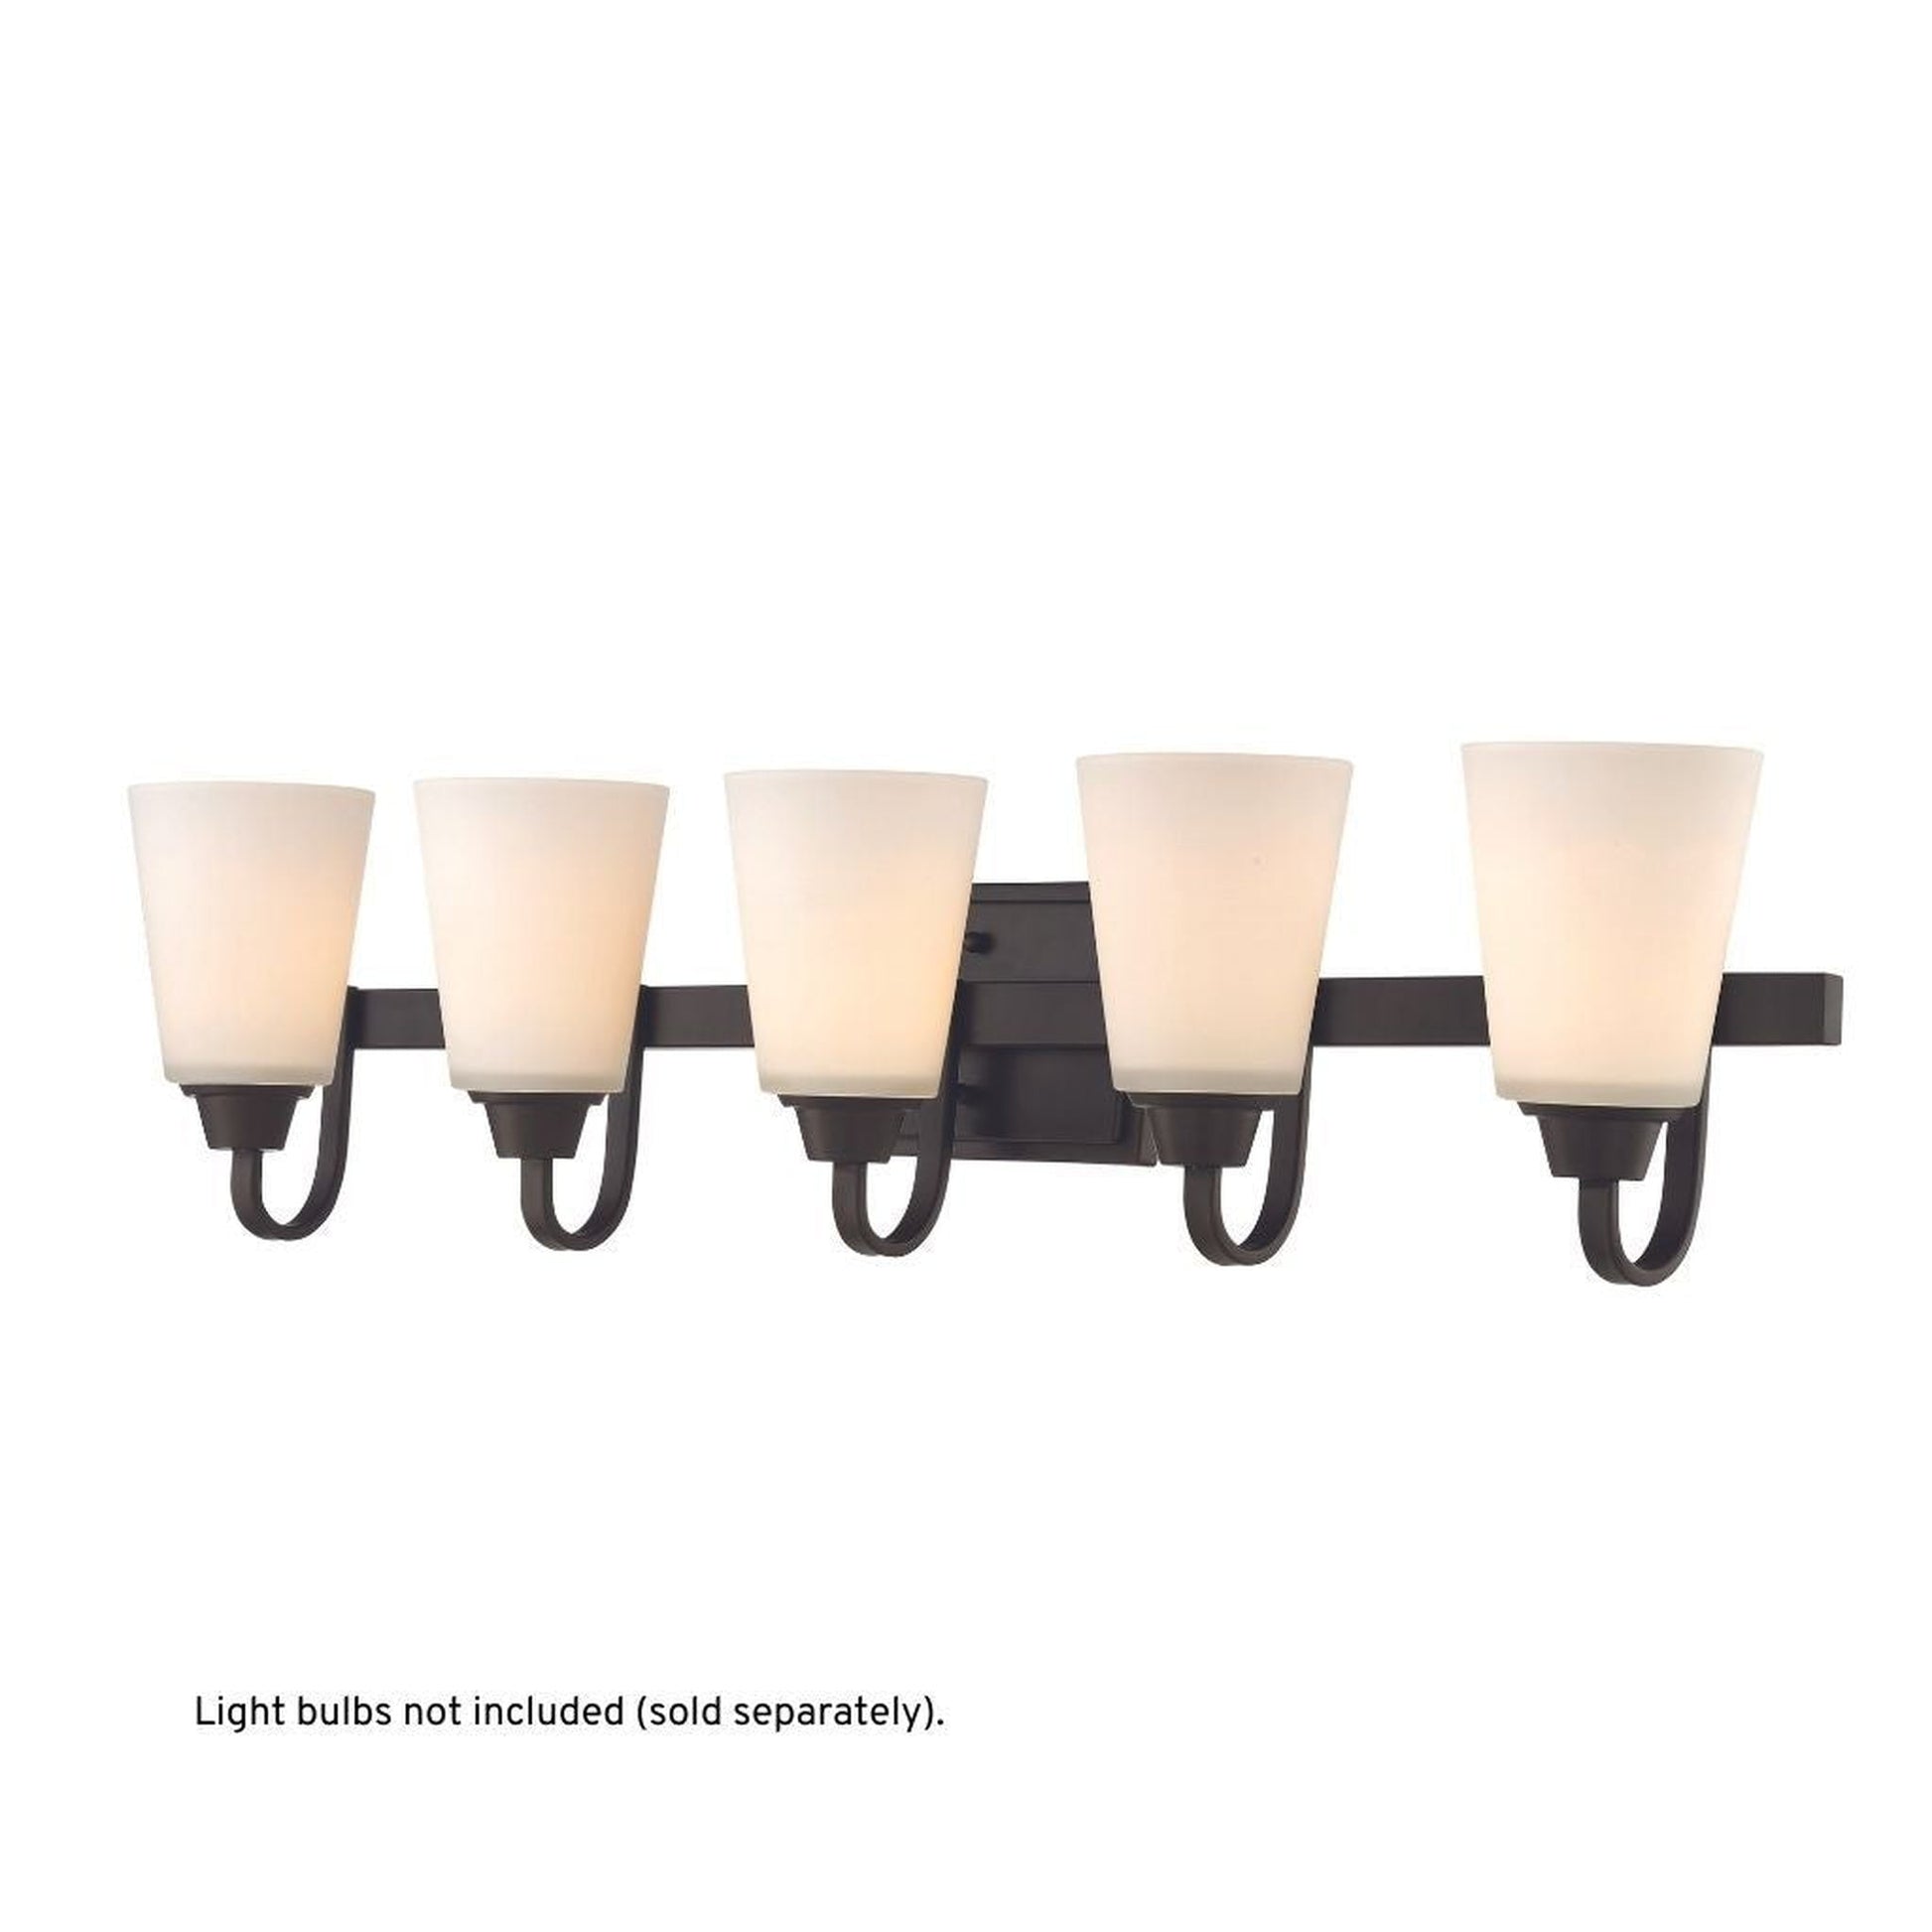 Craftmade Grace 37" 5-Light Espresso Vanity Light With White Frosted Glass Shades